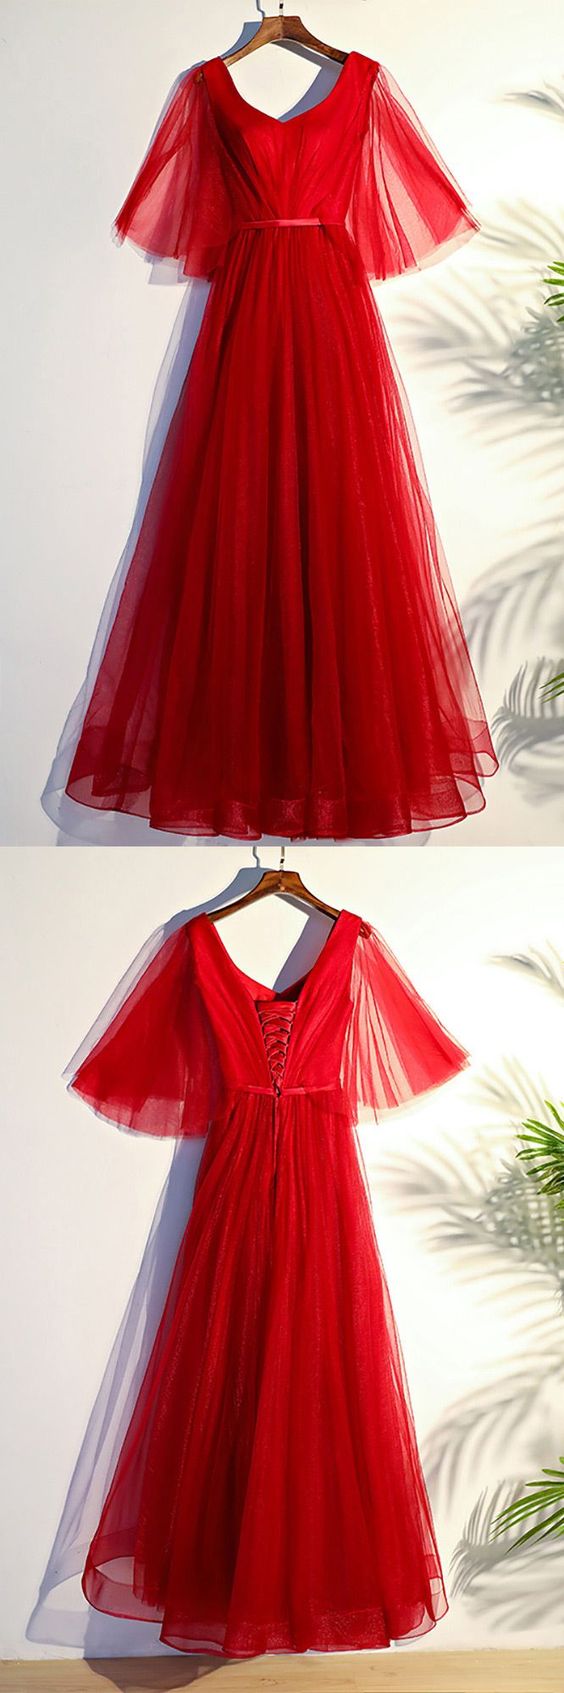 Cheap Prom Dresses Flowy Red Butterfly Sleeves Long Formal Party Dress   cg9088